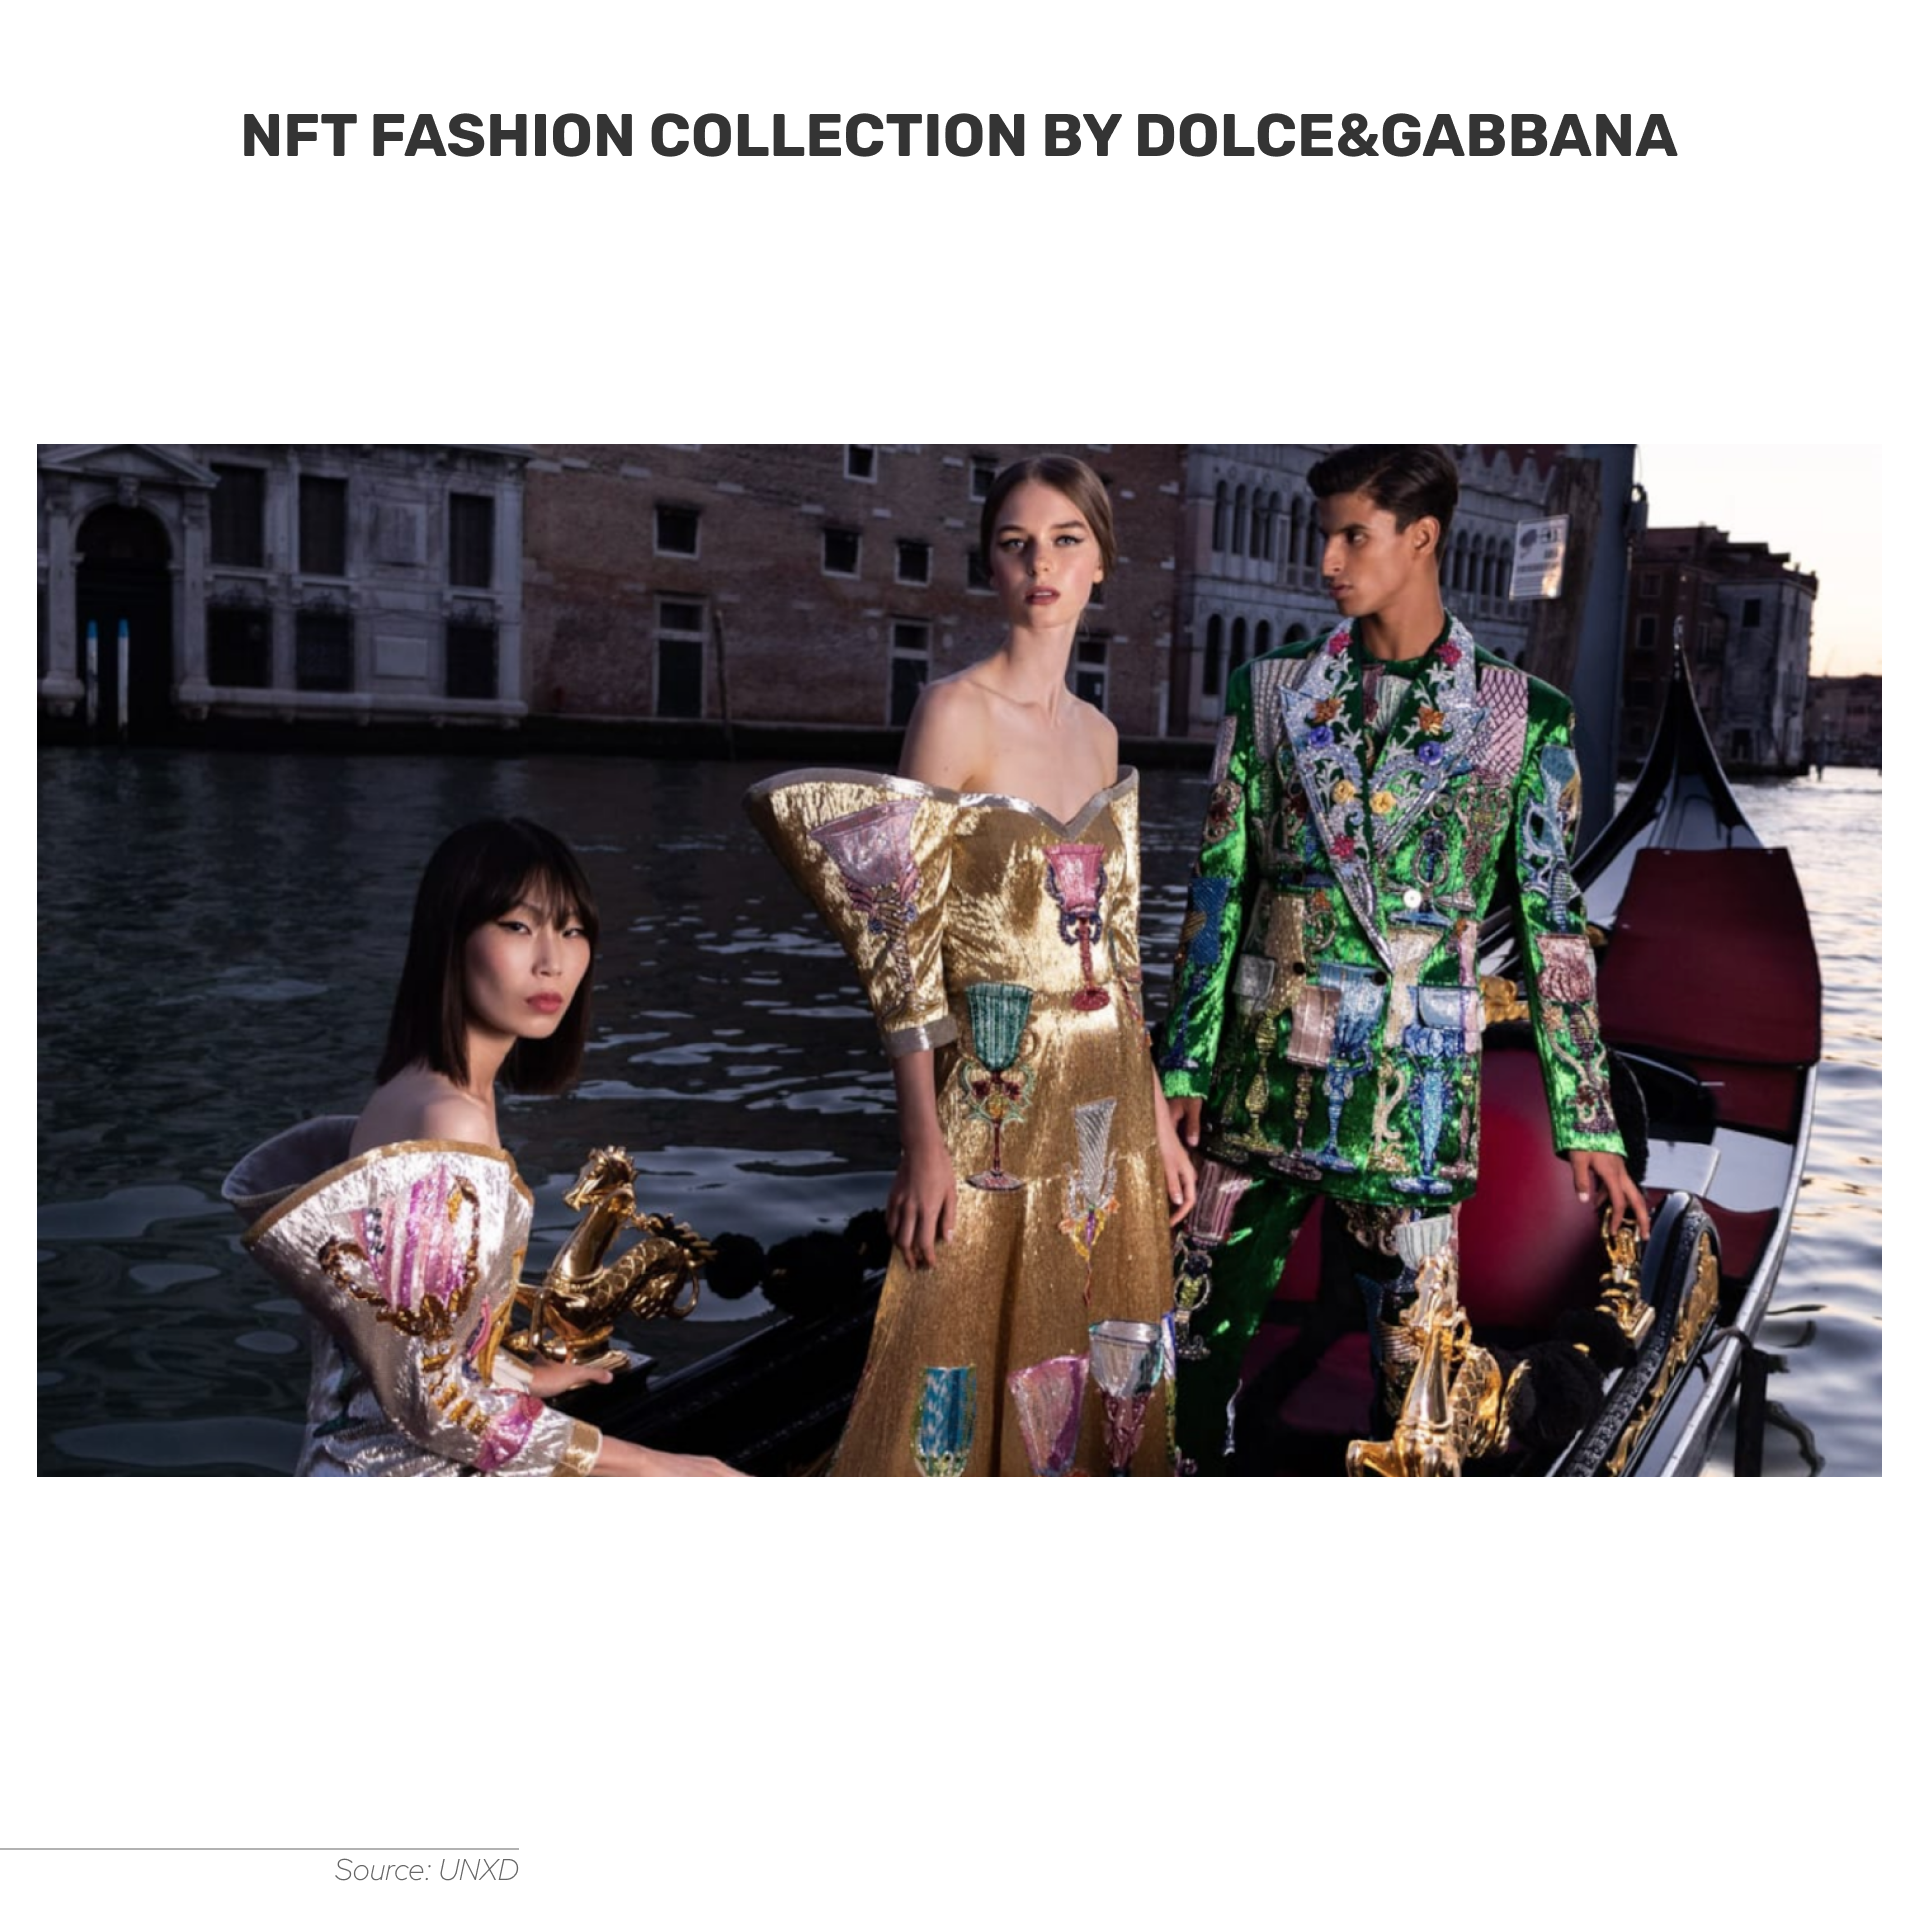 Collezione Genesi is a collection consisting of nine items created by Dolce&Gabbana.